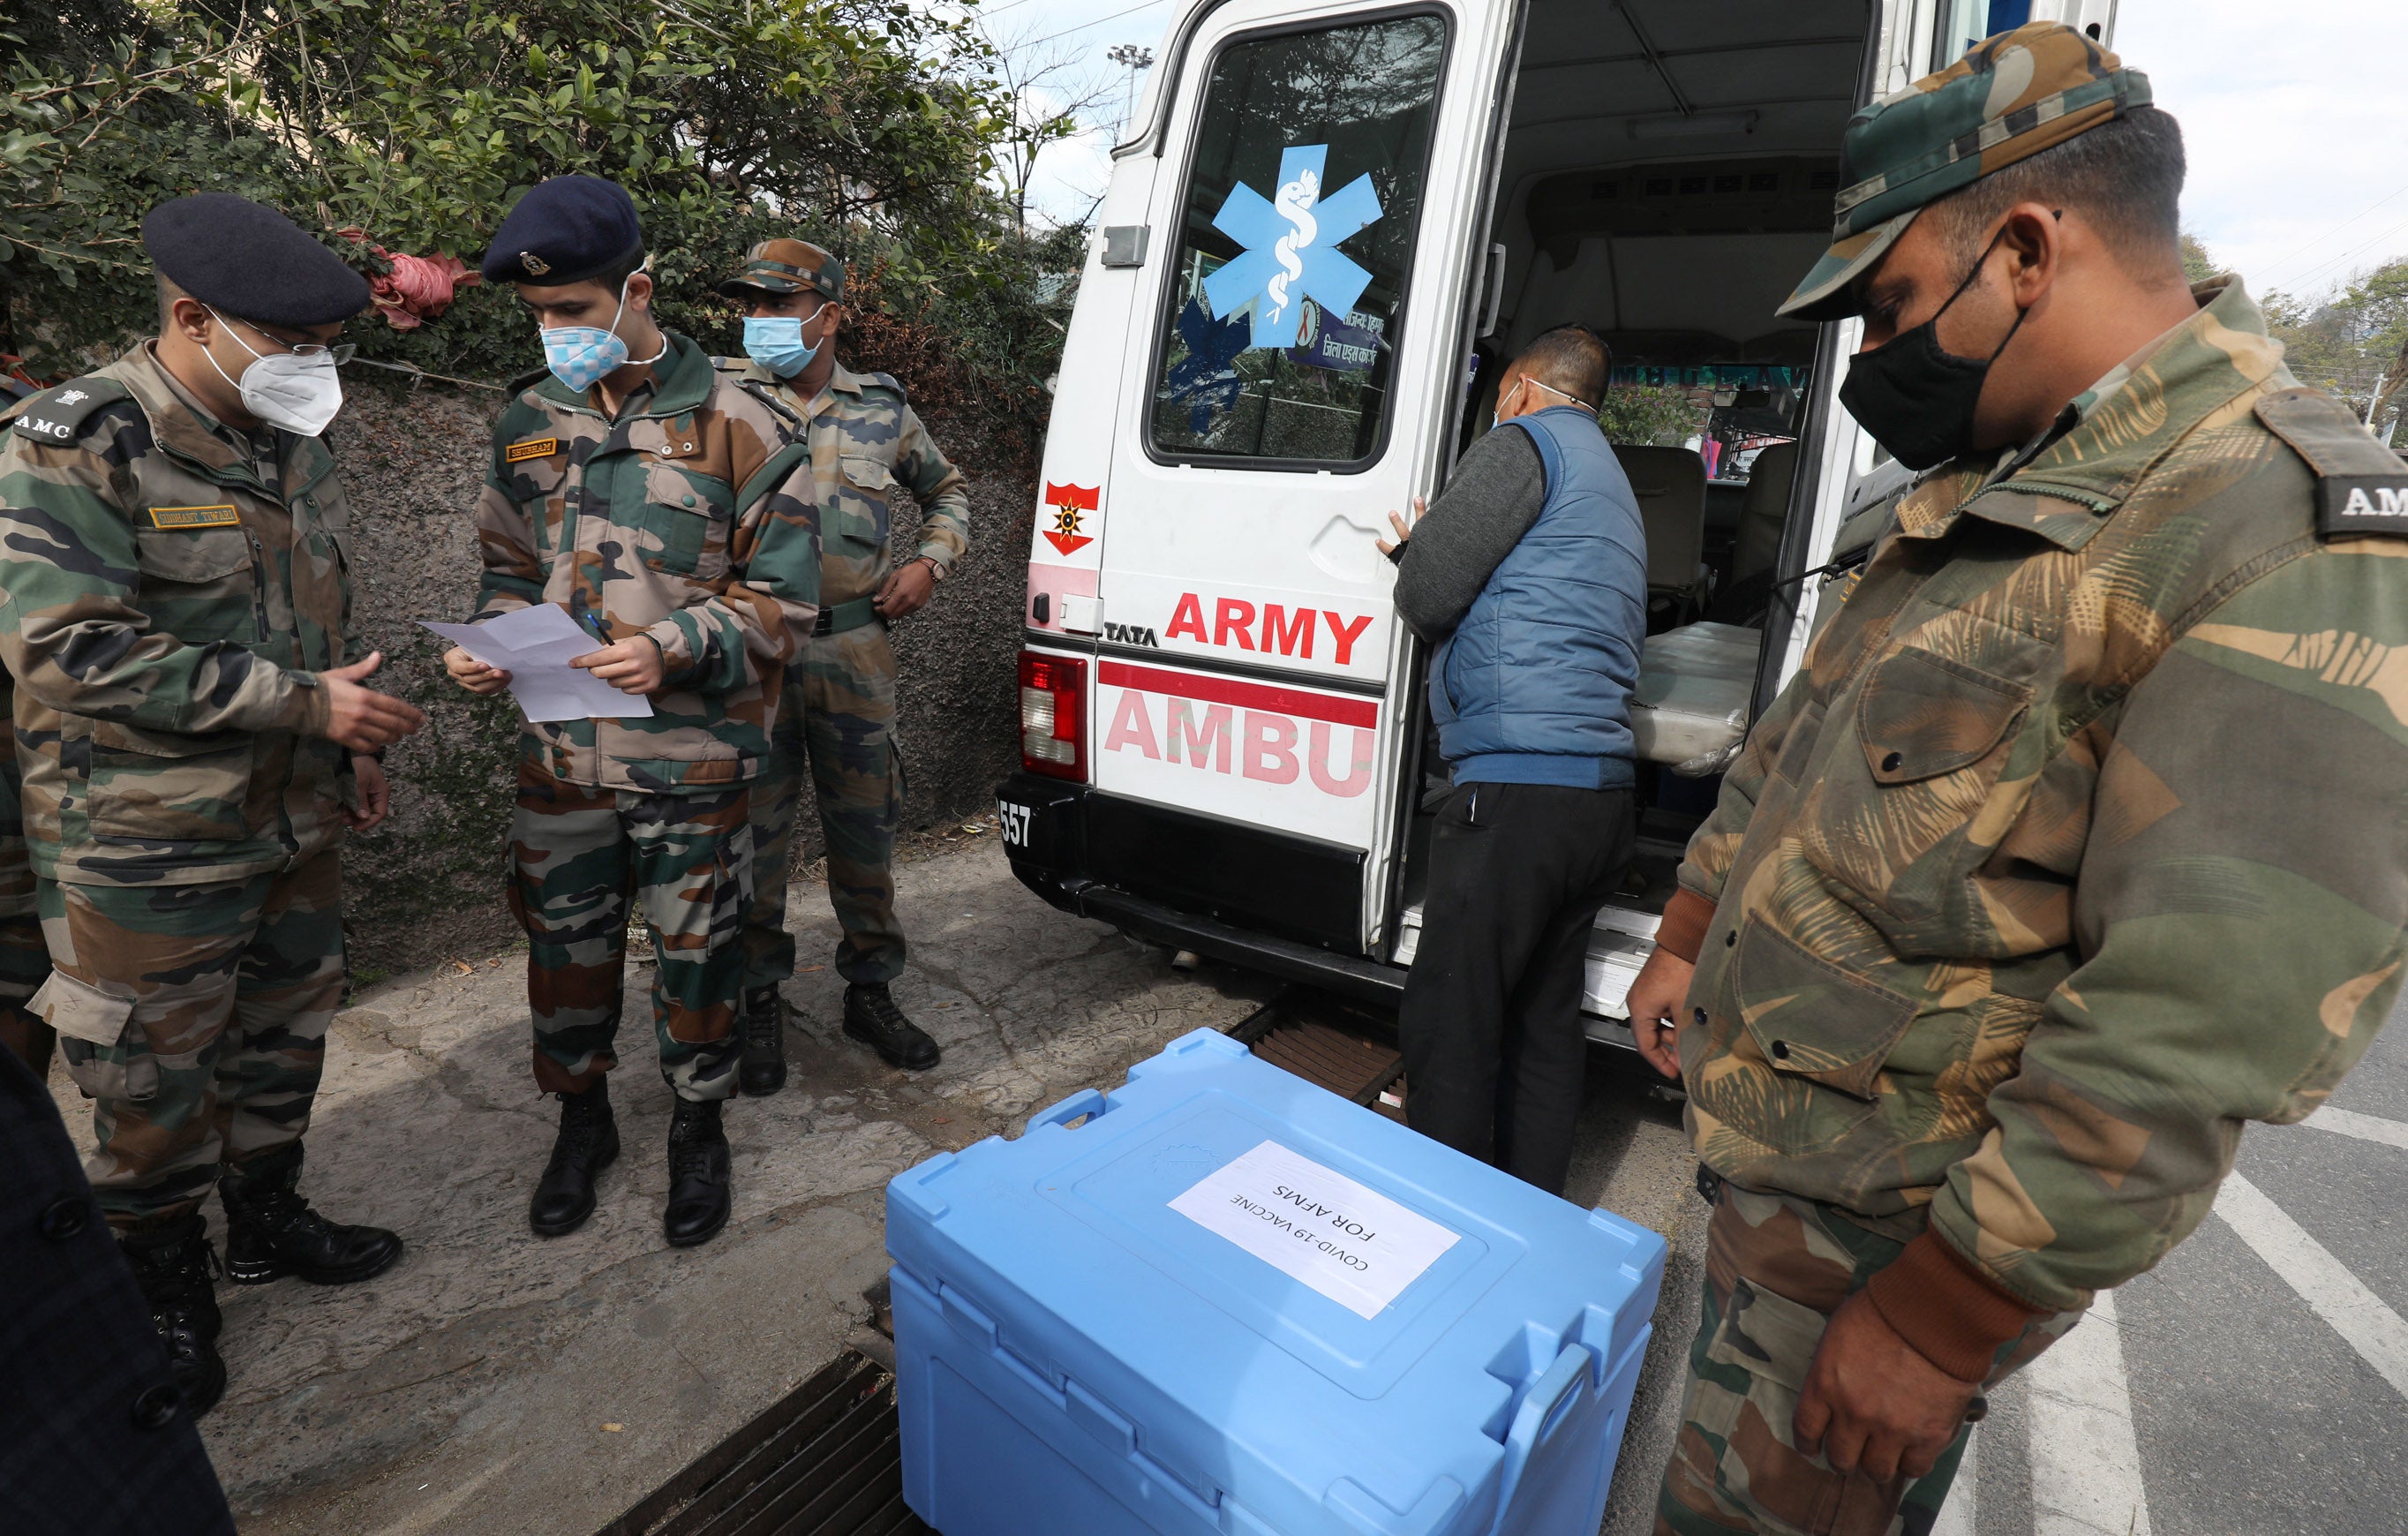 Indian army personnel assist in distributing the Covid-19 vaccines